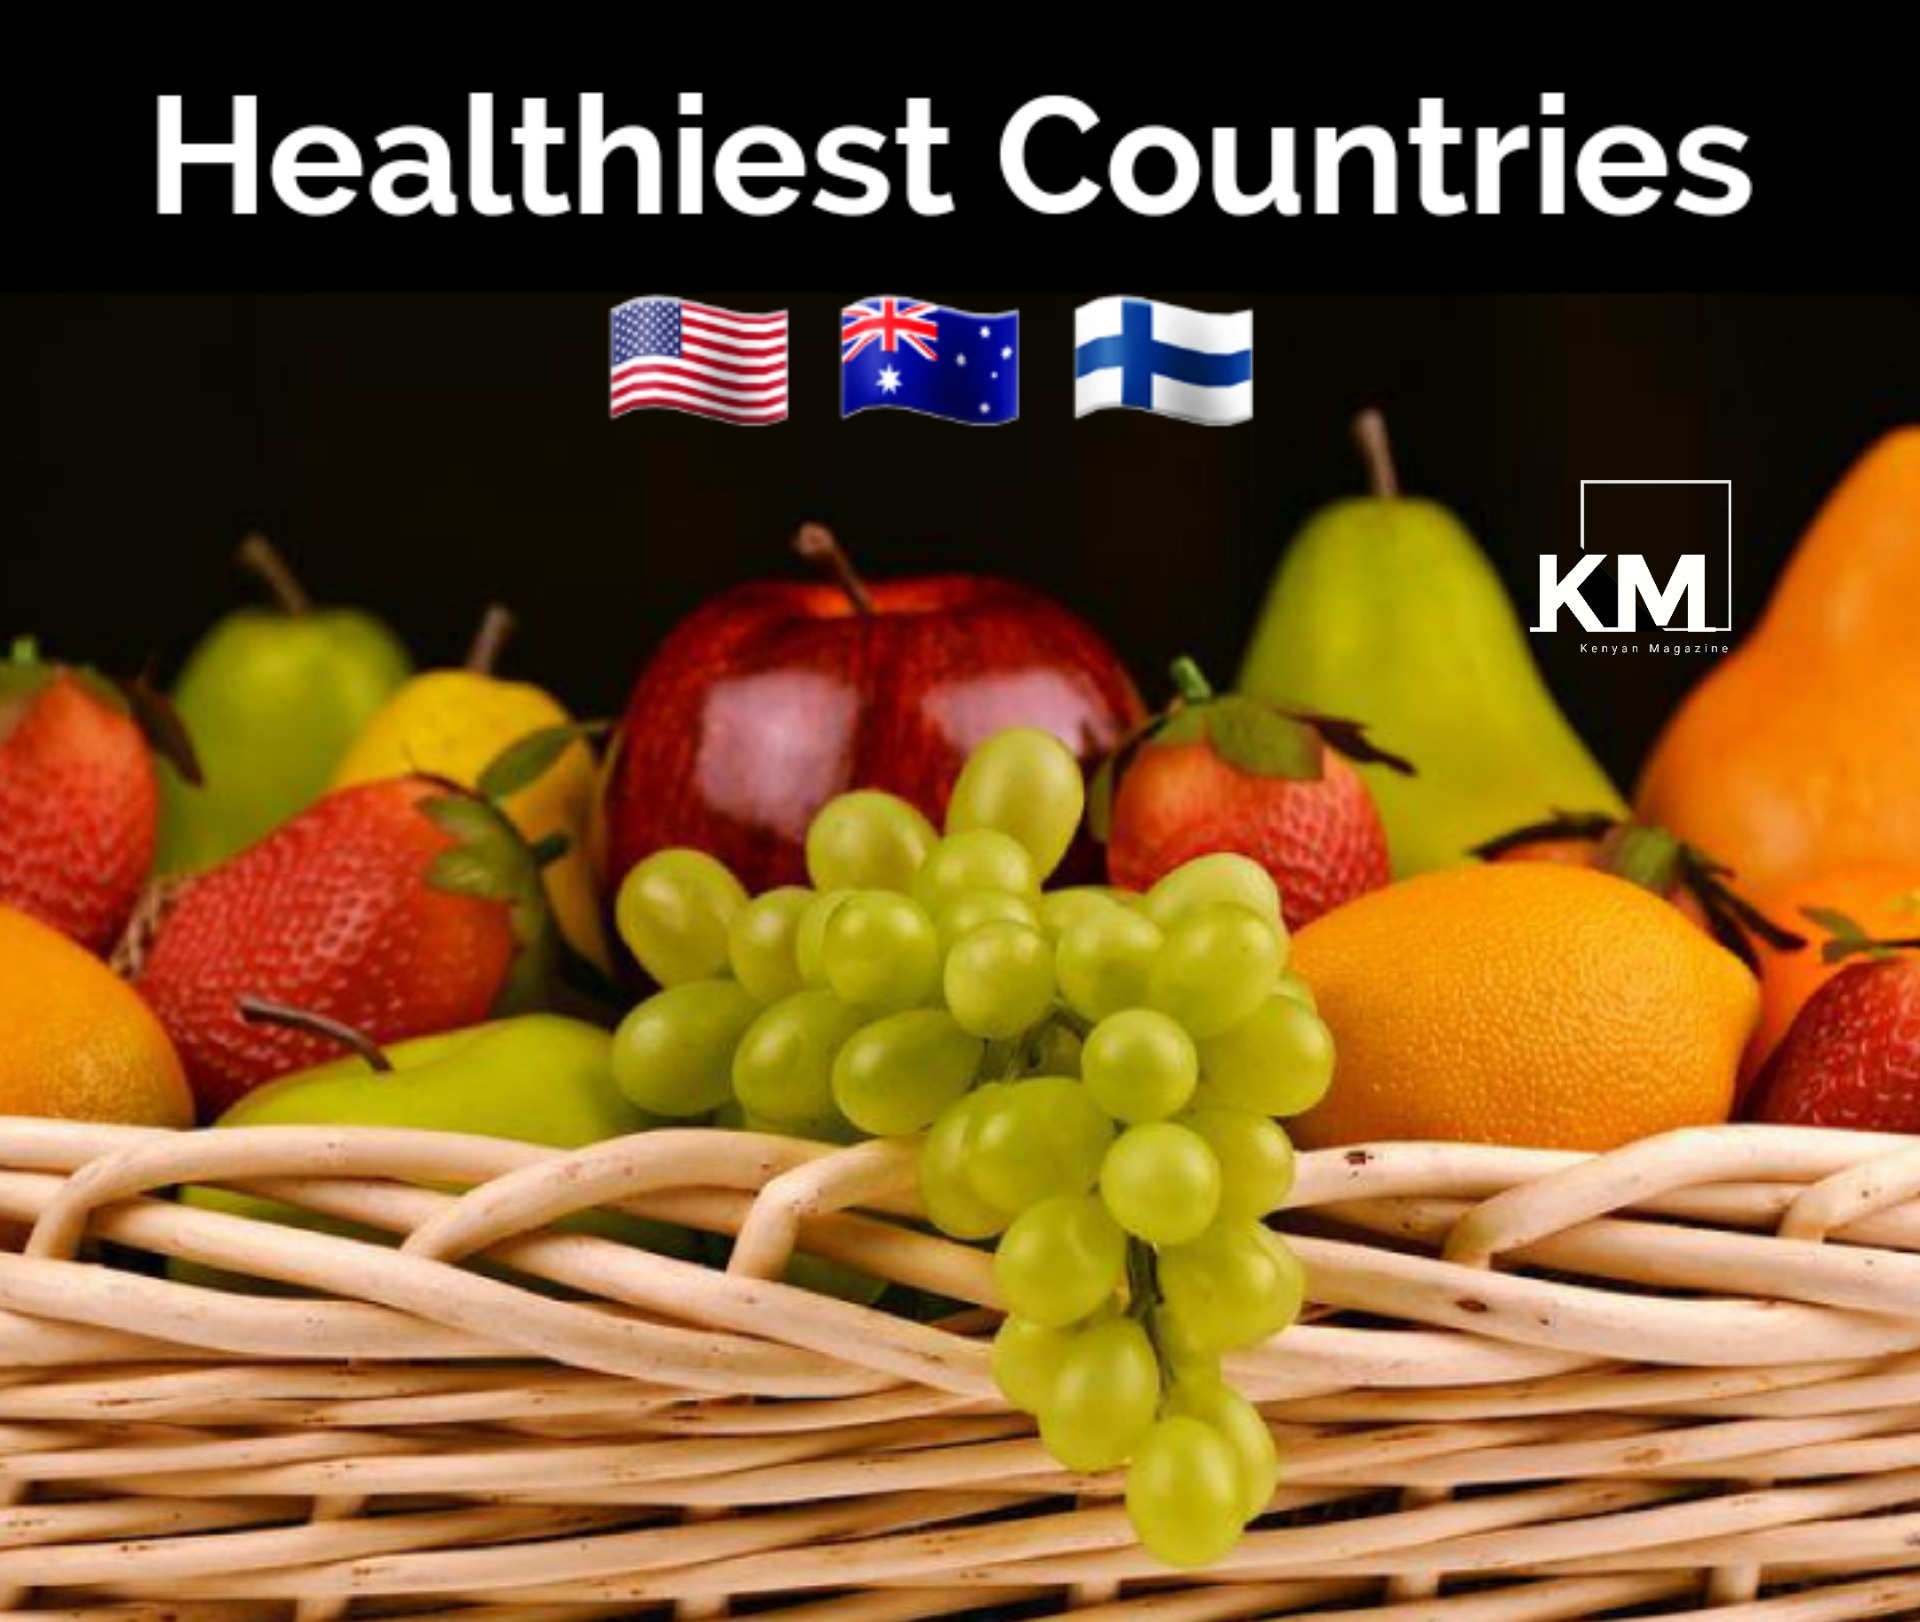 Healthiest Countries